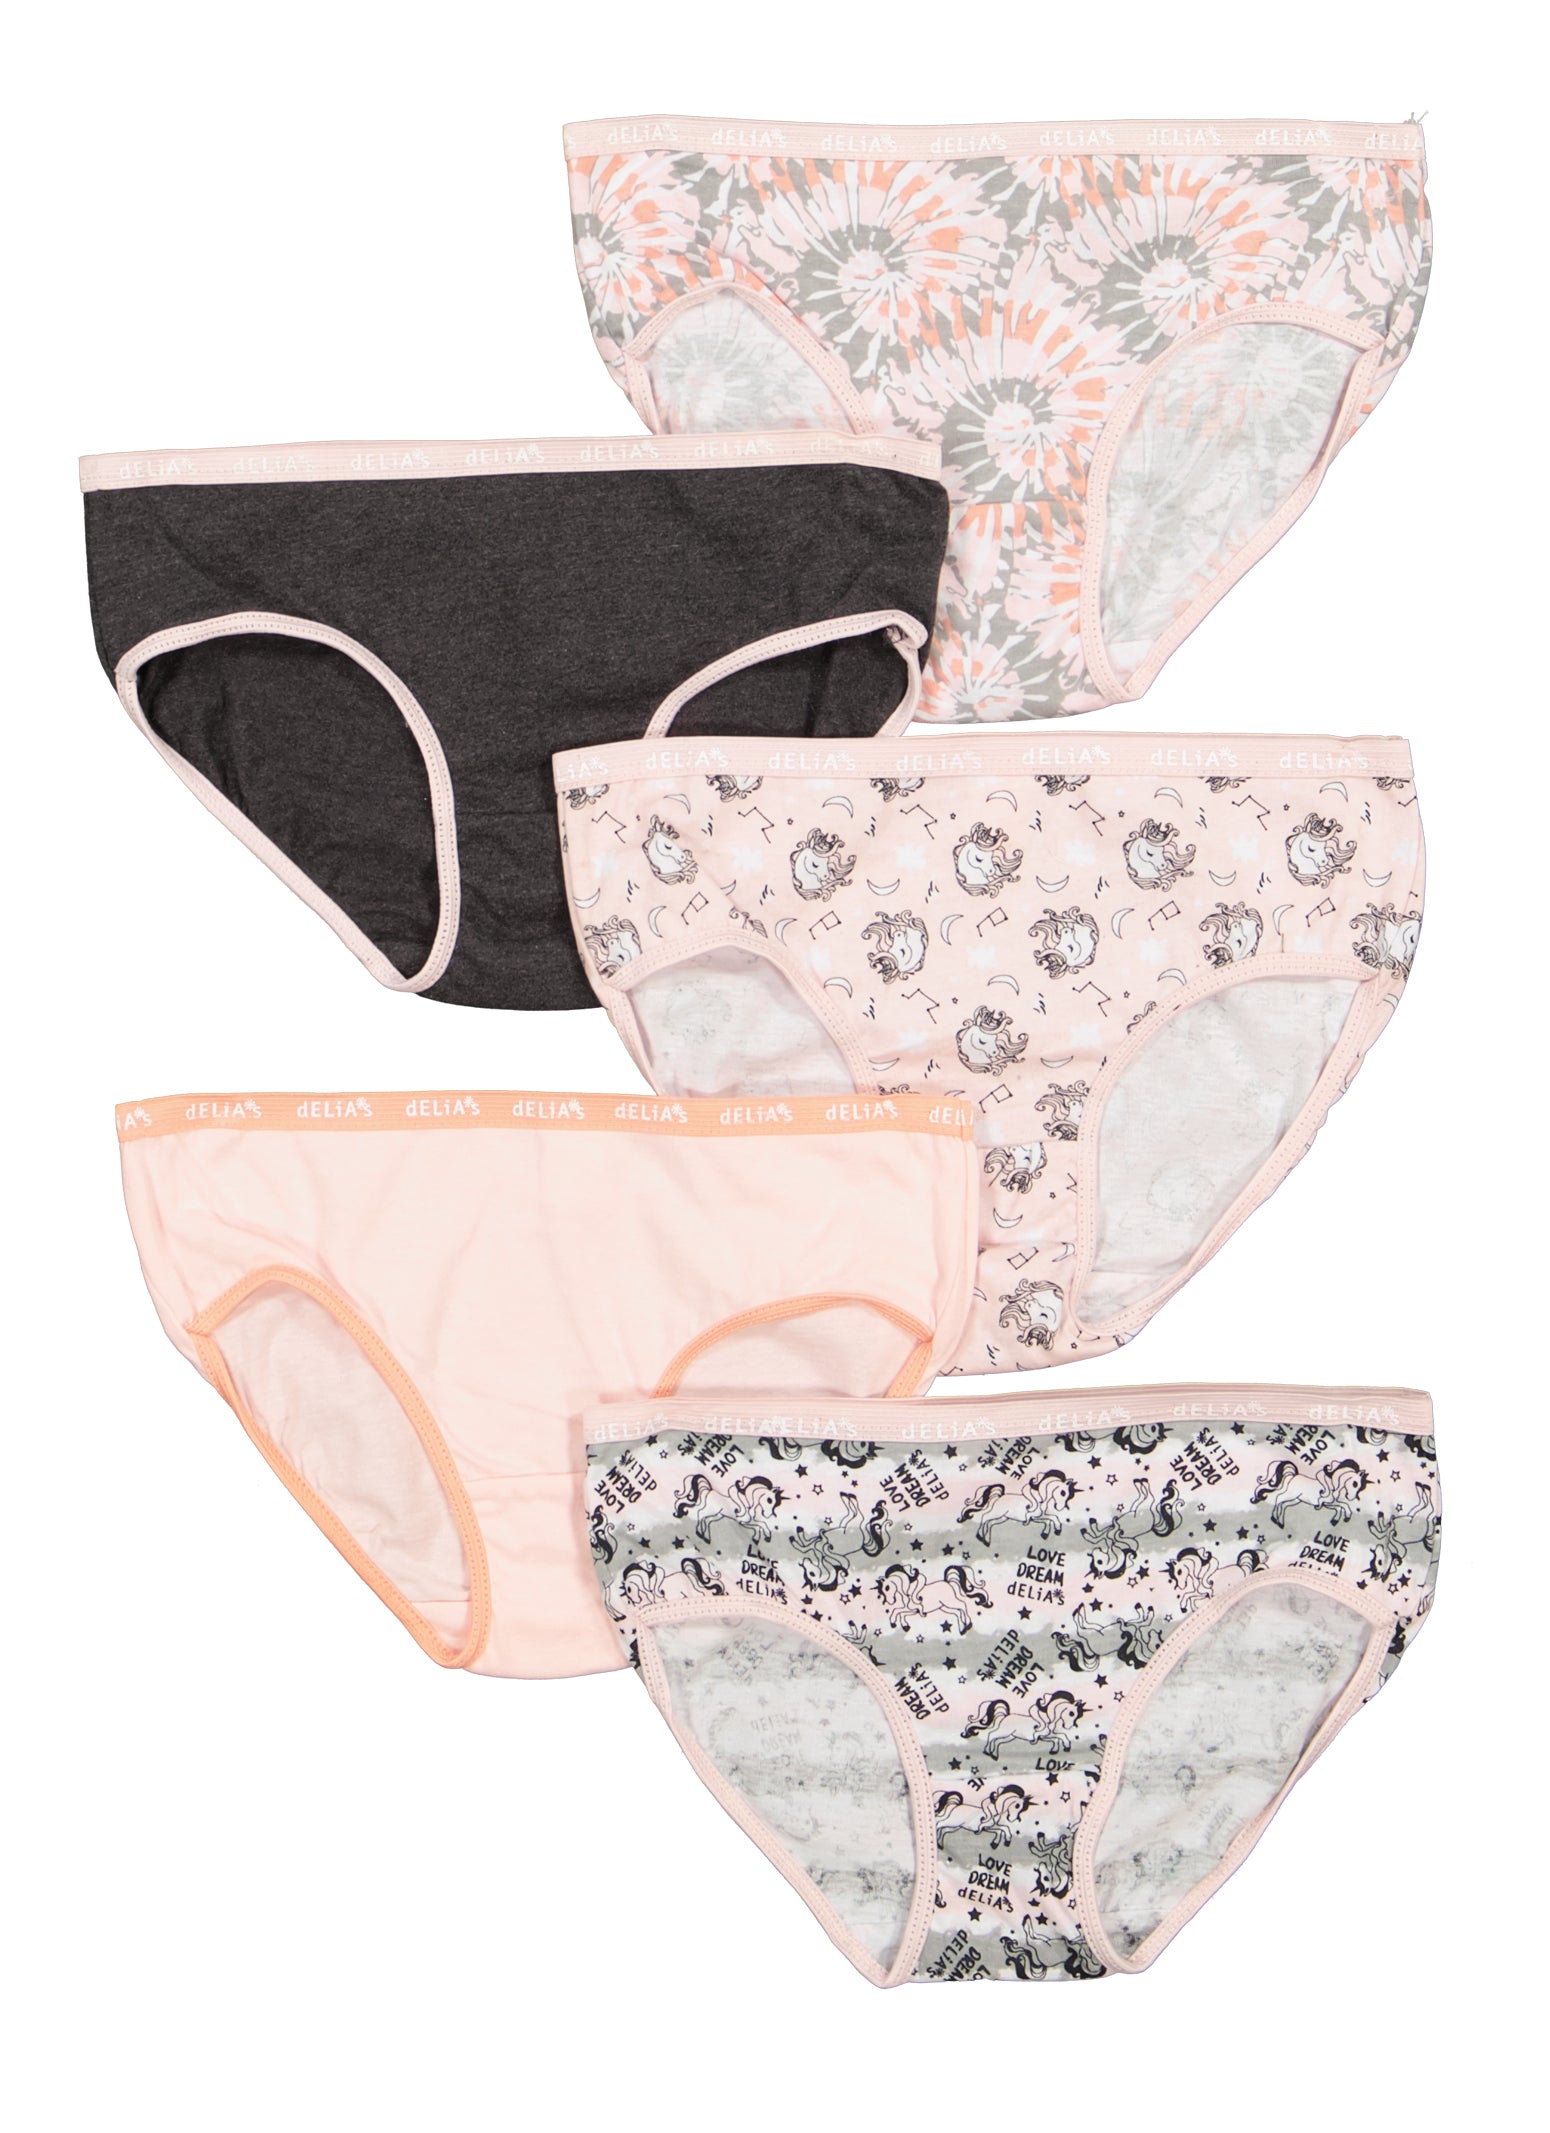 dELiA's Women's Printed/Solid Thong G-String Underwear Panty Pack